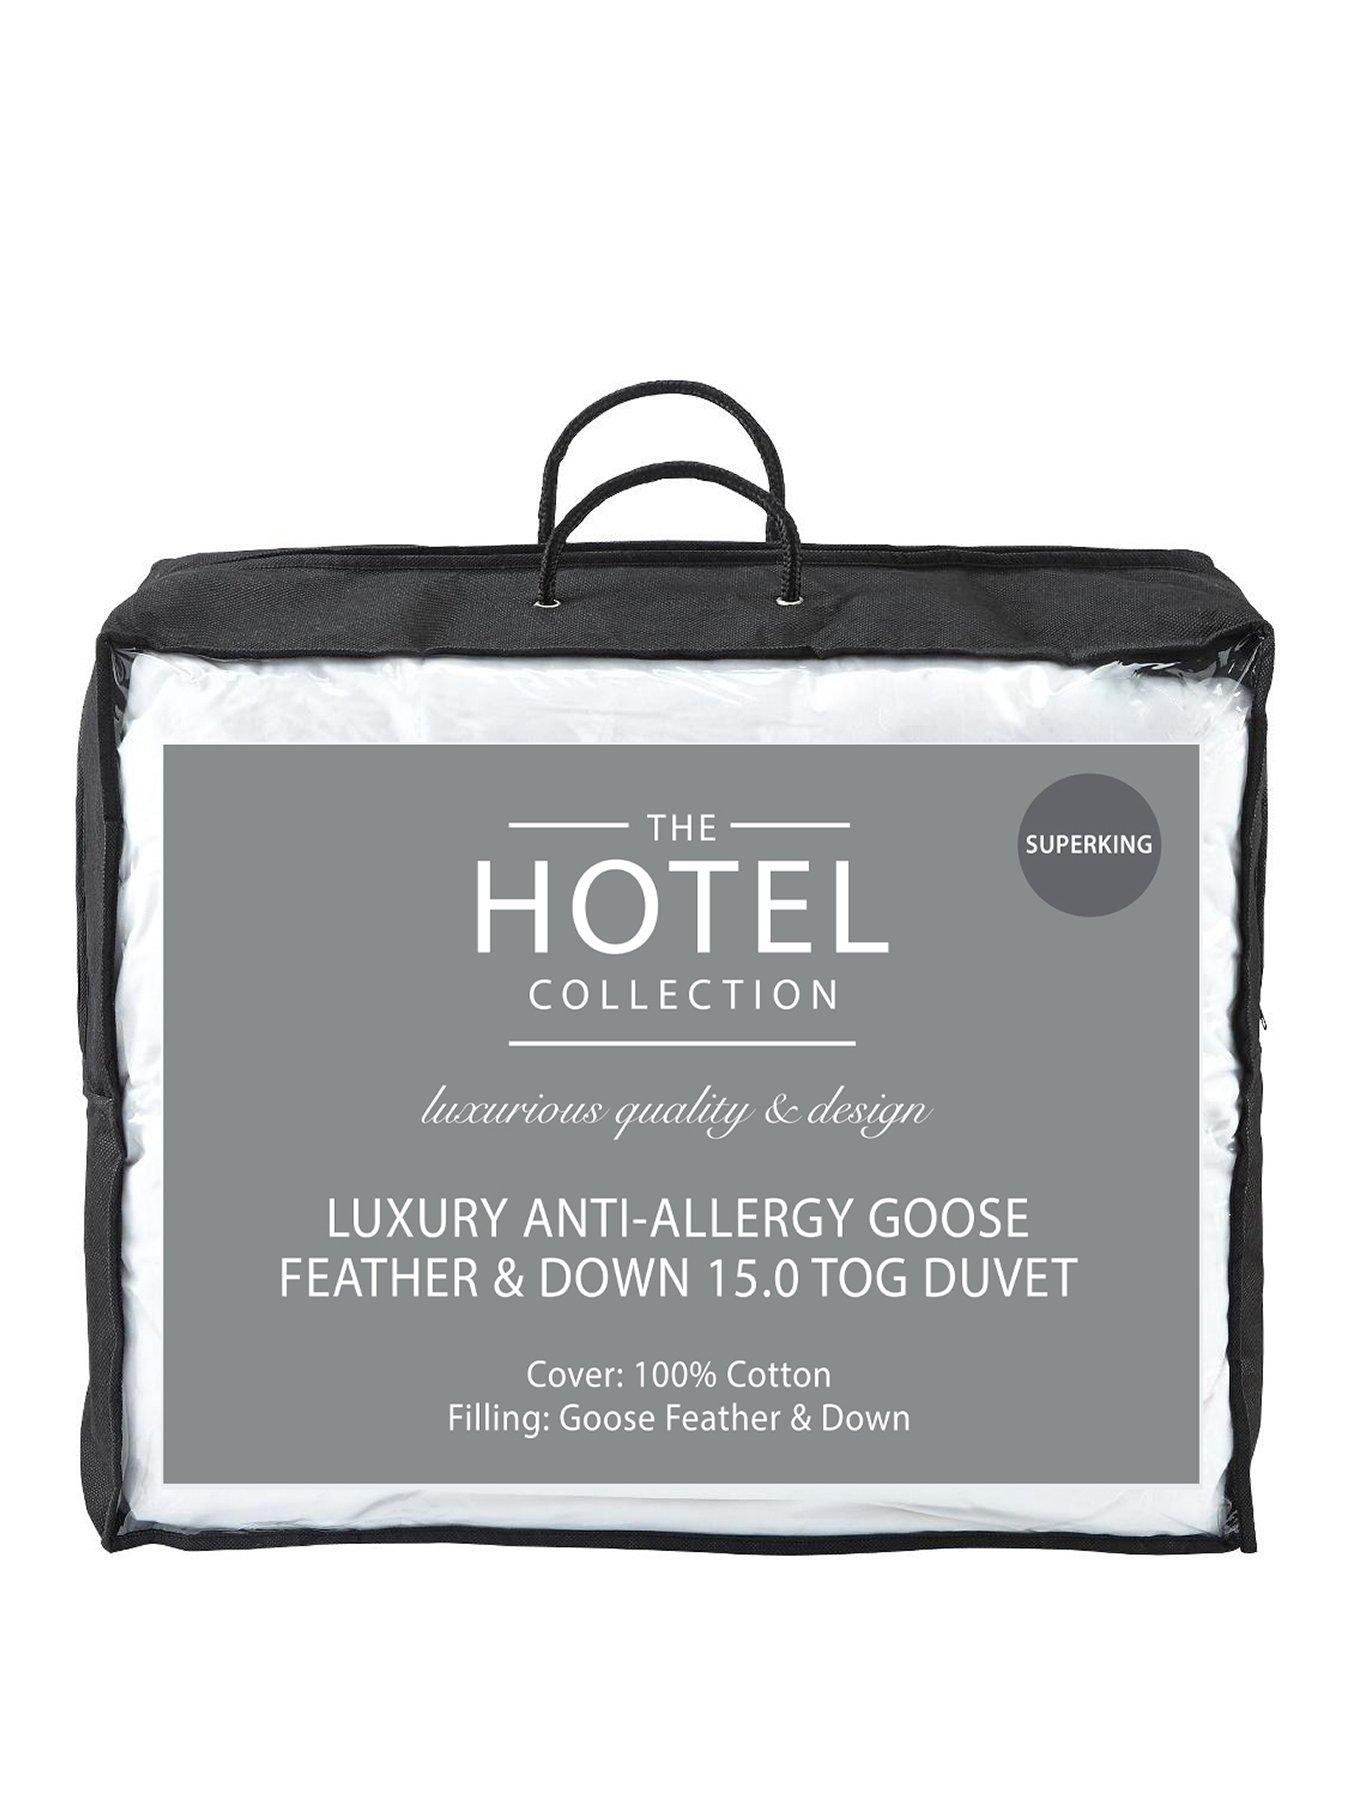 Linea Luxury Hotel Collection White Feather & Down Duvet 13.5 Tog Super King. 